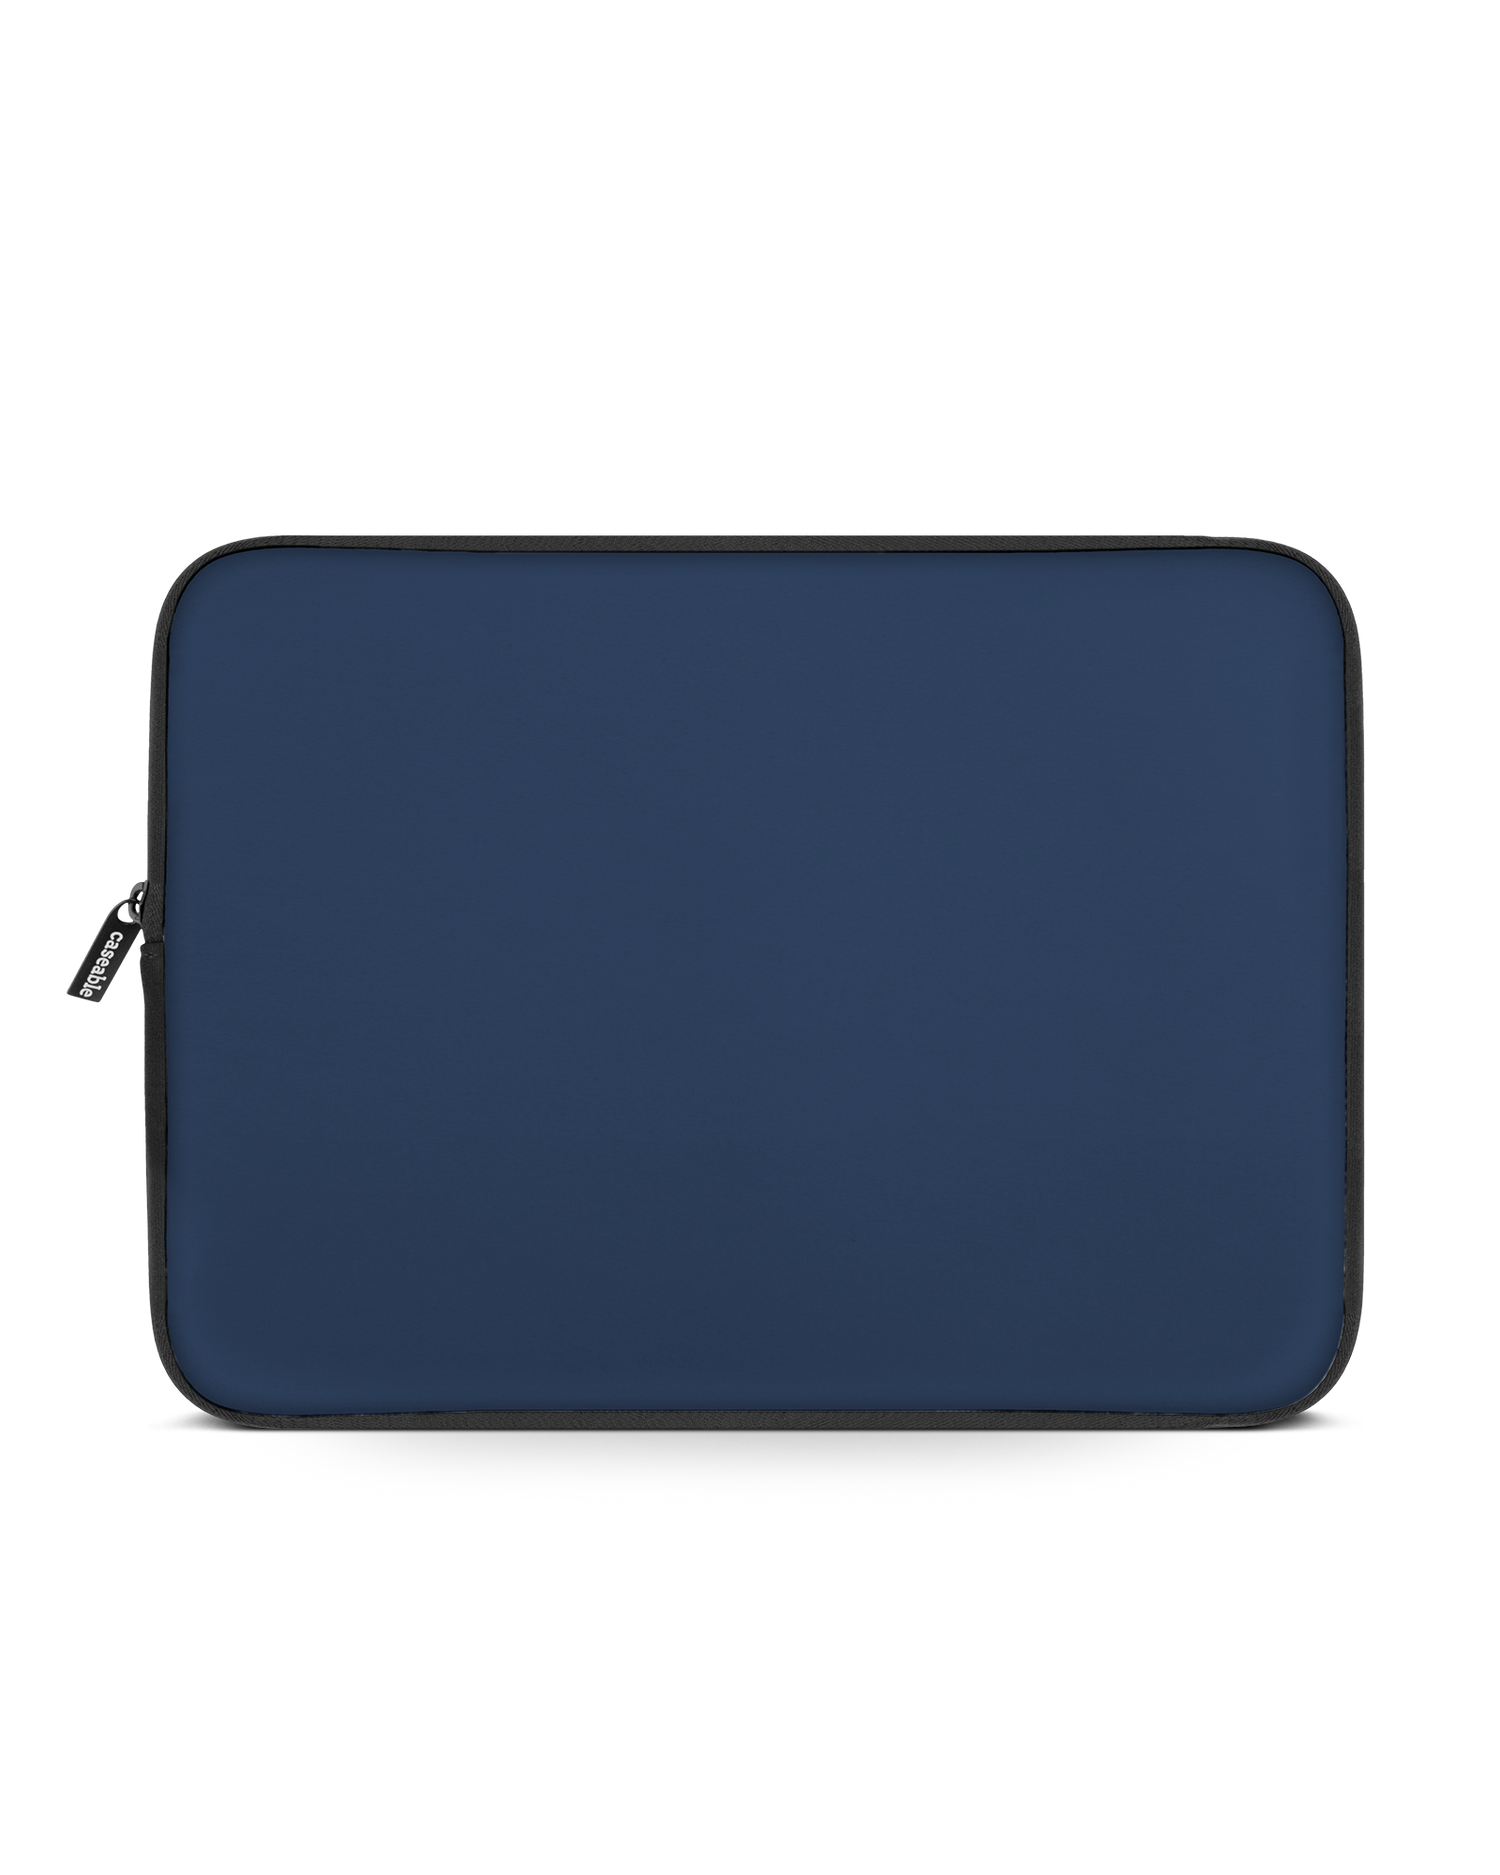 NAVY Laptop Case 15 inch: Front View